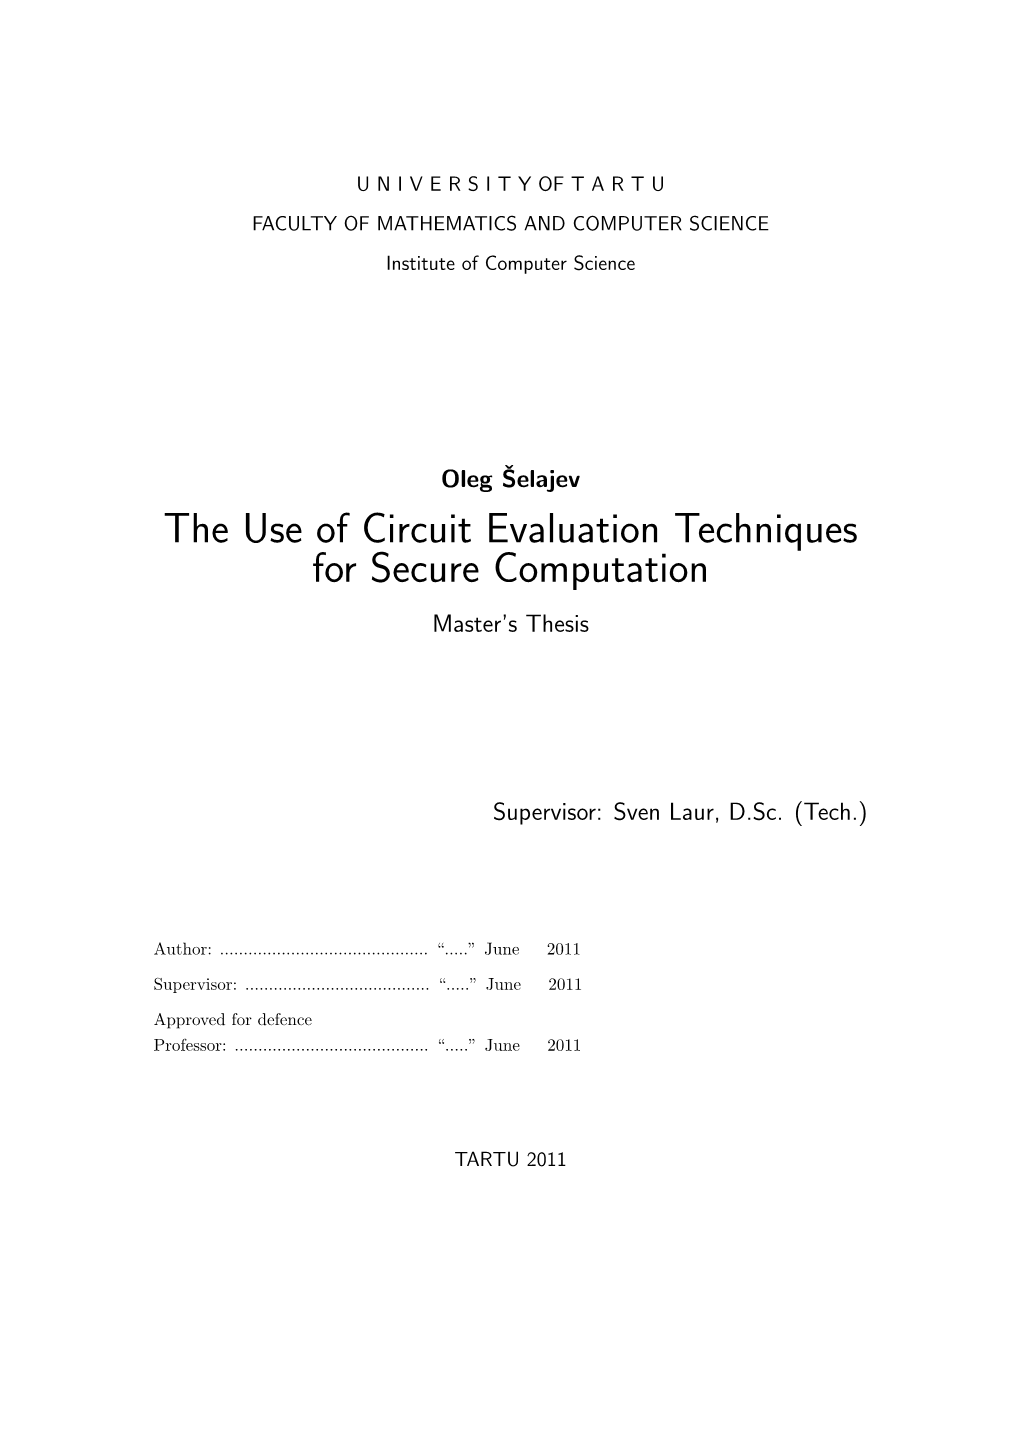 The Use of Circuit Evaluation Techniques for Secure Computation Master’S Thesis